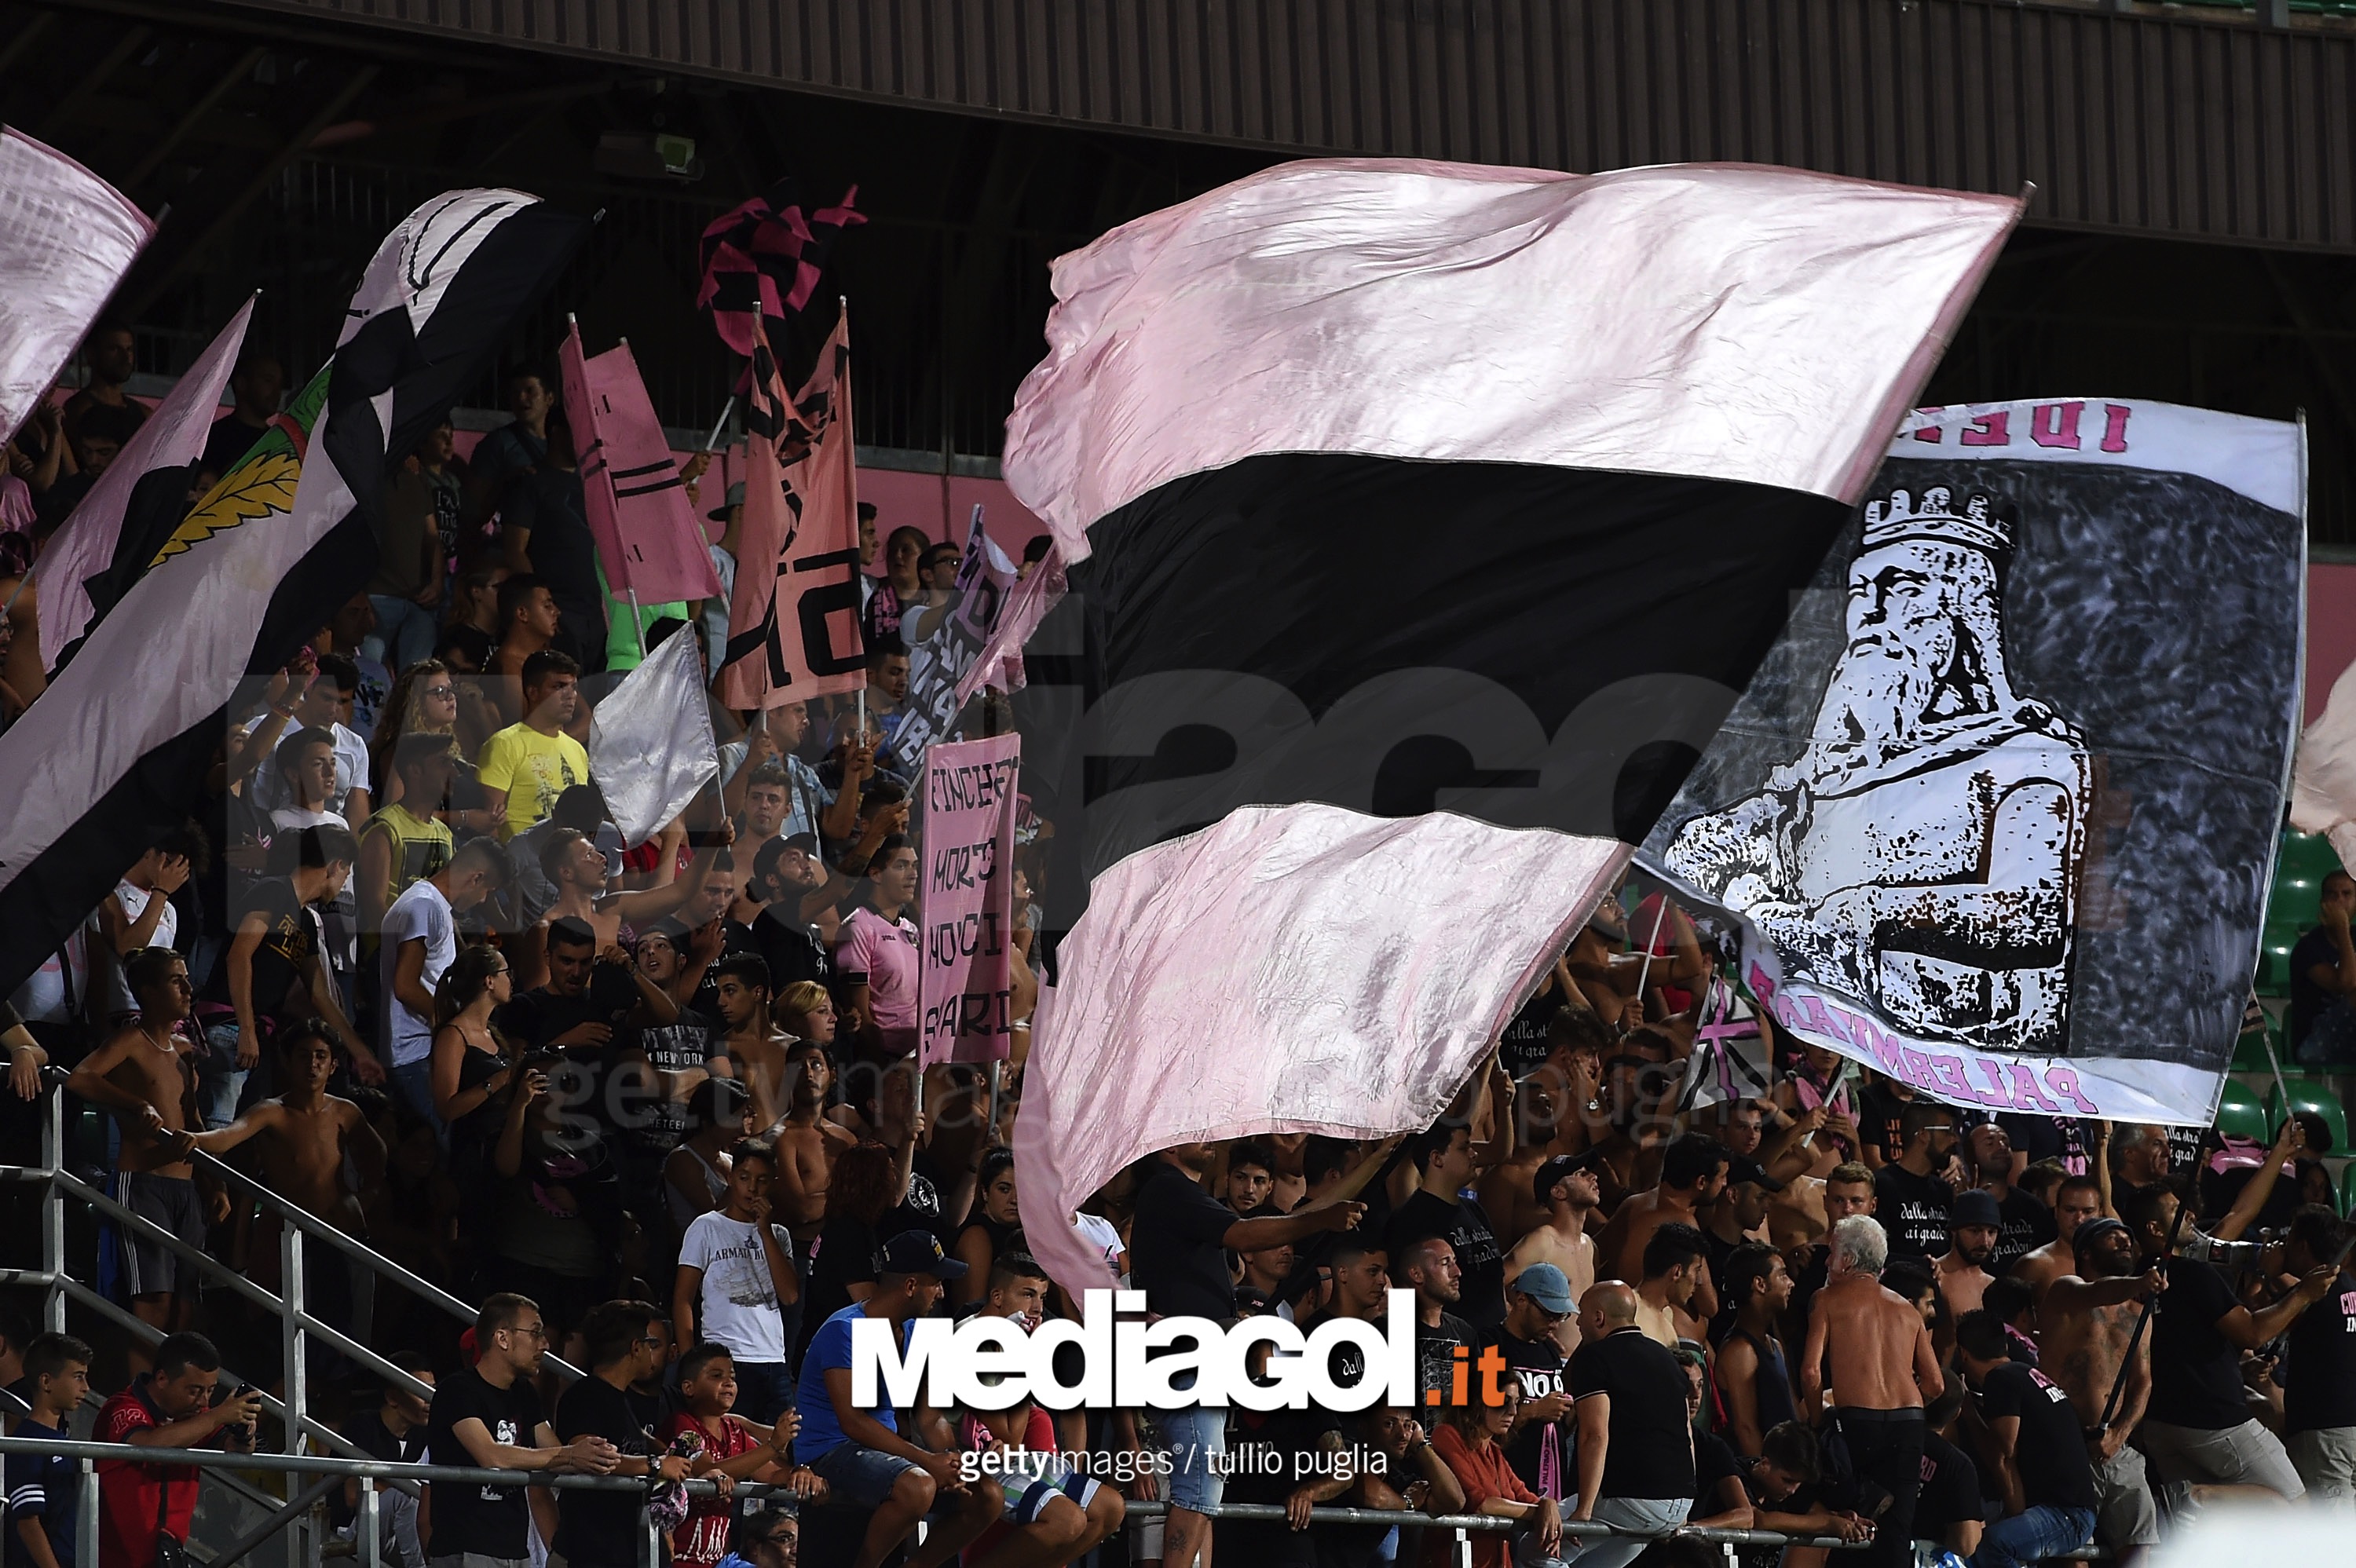 PALERMO, ITALY - AUGUST 06:  Fans of Palermo show their support during the friendly match between US Citta' di Palermo and Olympique Marseille at Renzo Barbera Stadium on August 6, 2016 in Palermo, Italy.  (Photo by Tullio M. Puglia/Getty Images)